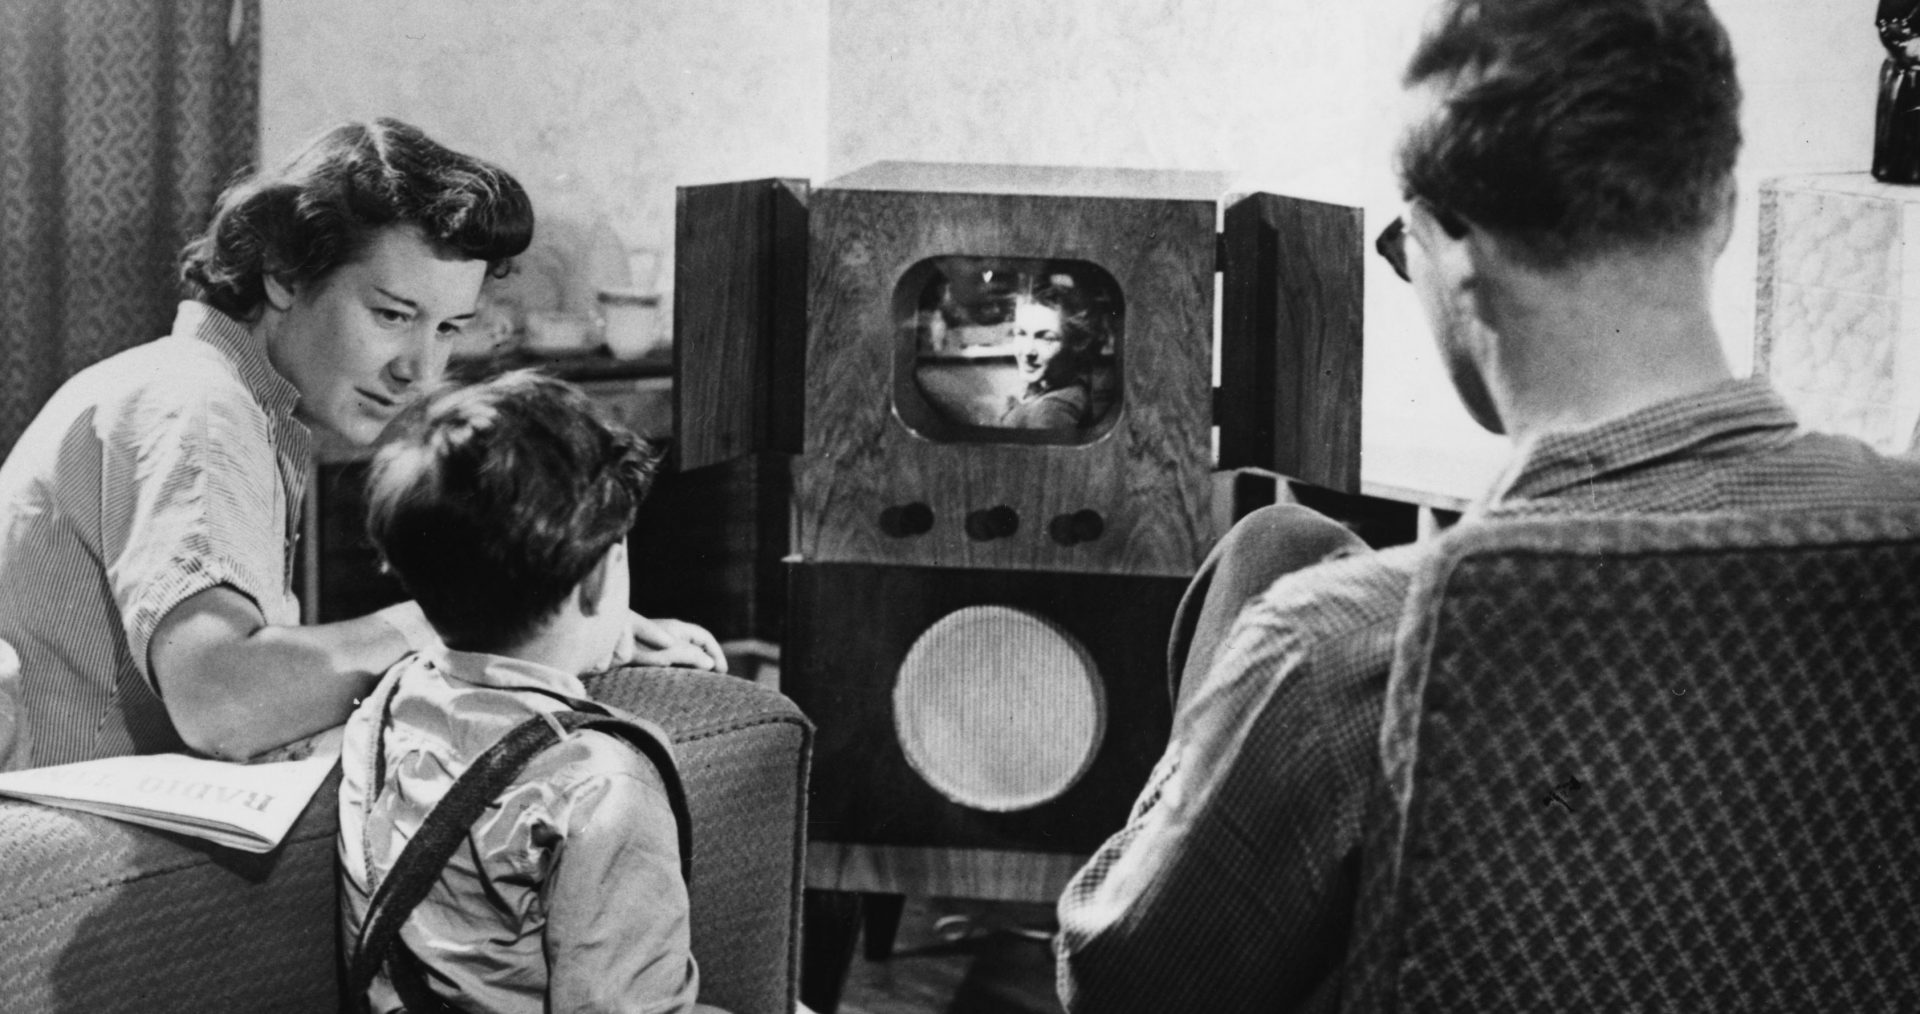 News from the past: inspired by BBC Children's Newsreel